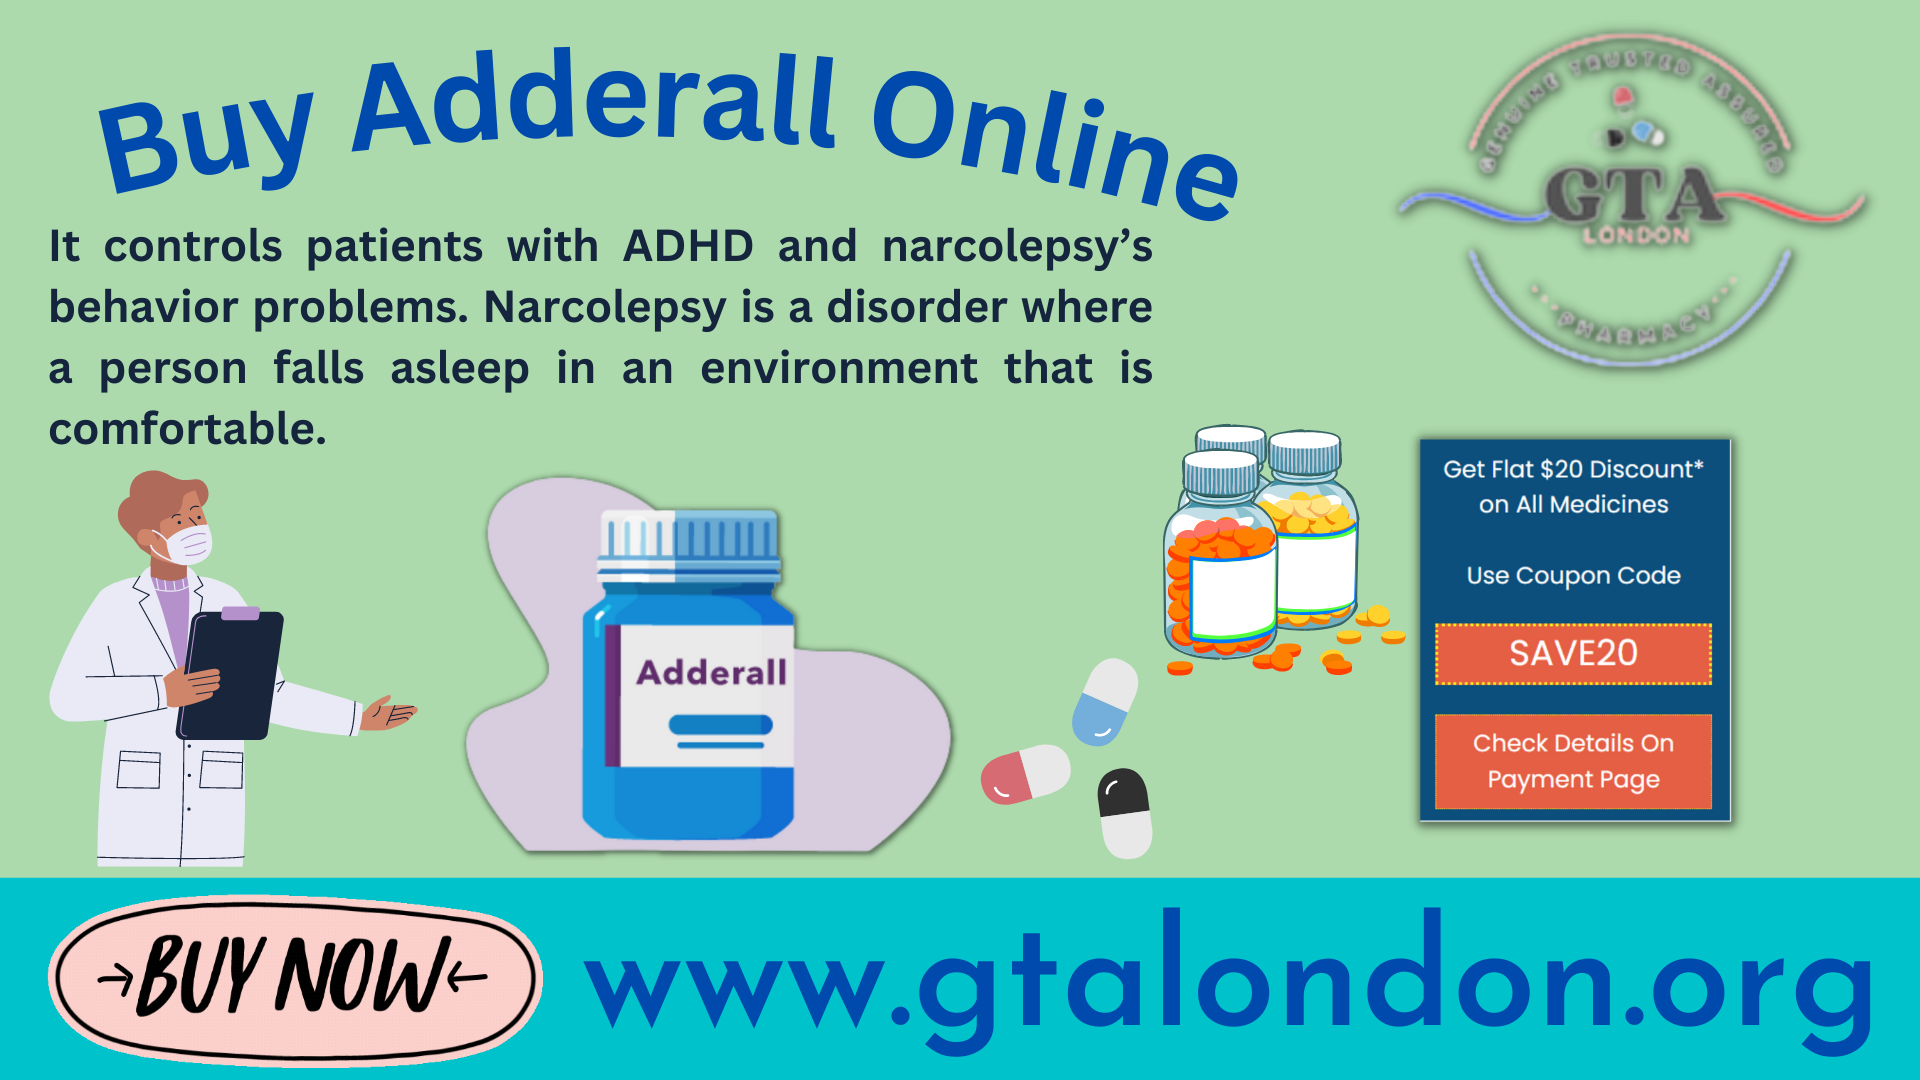 Adderall-f9a15ea6